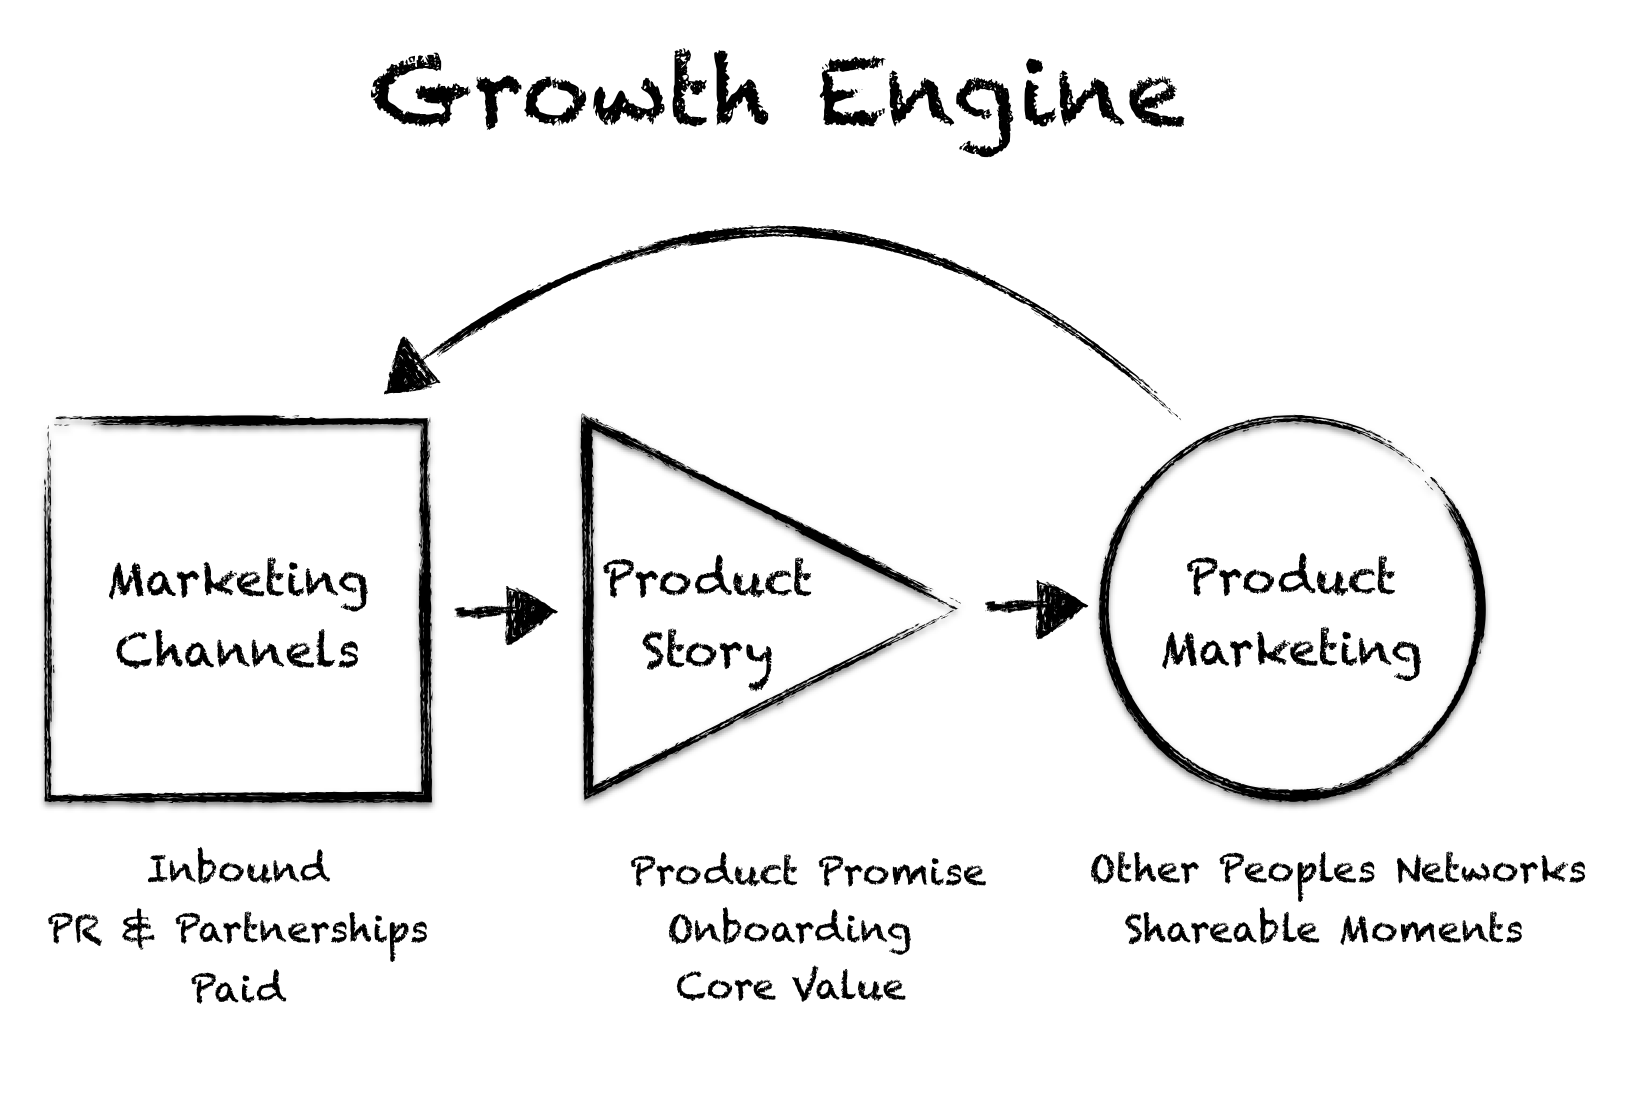 Building a Startup Growth Engine